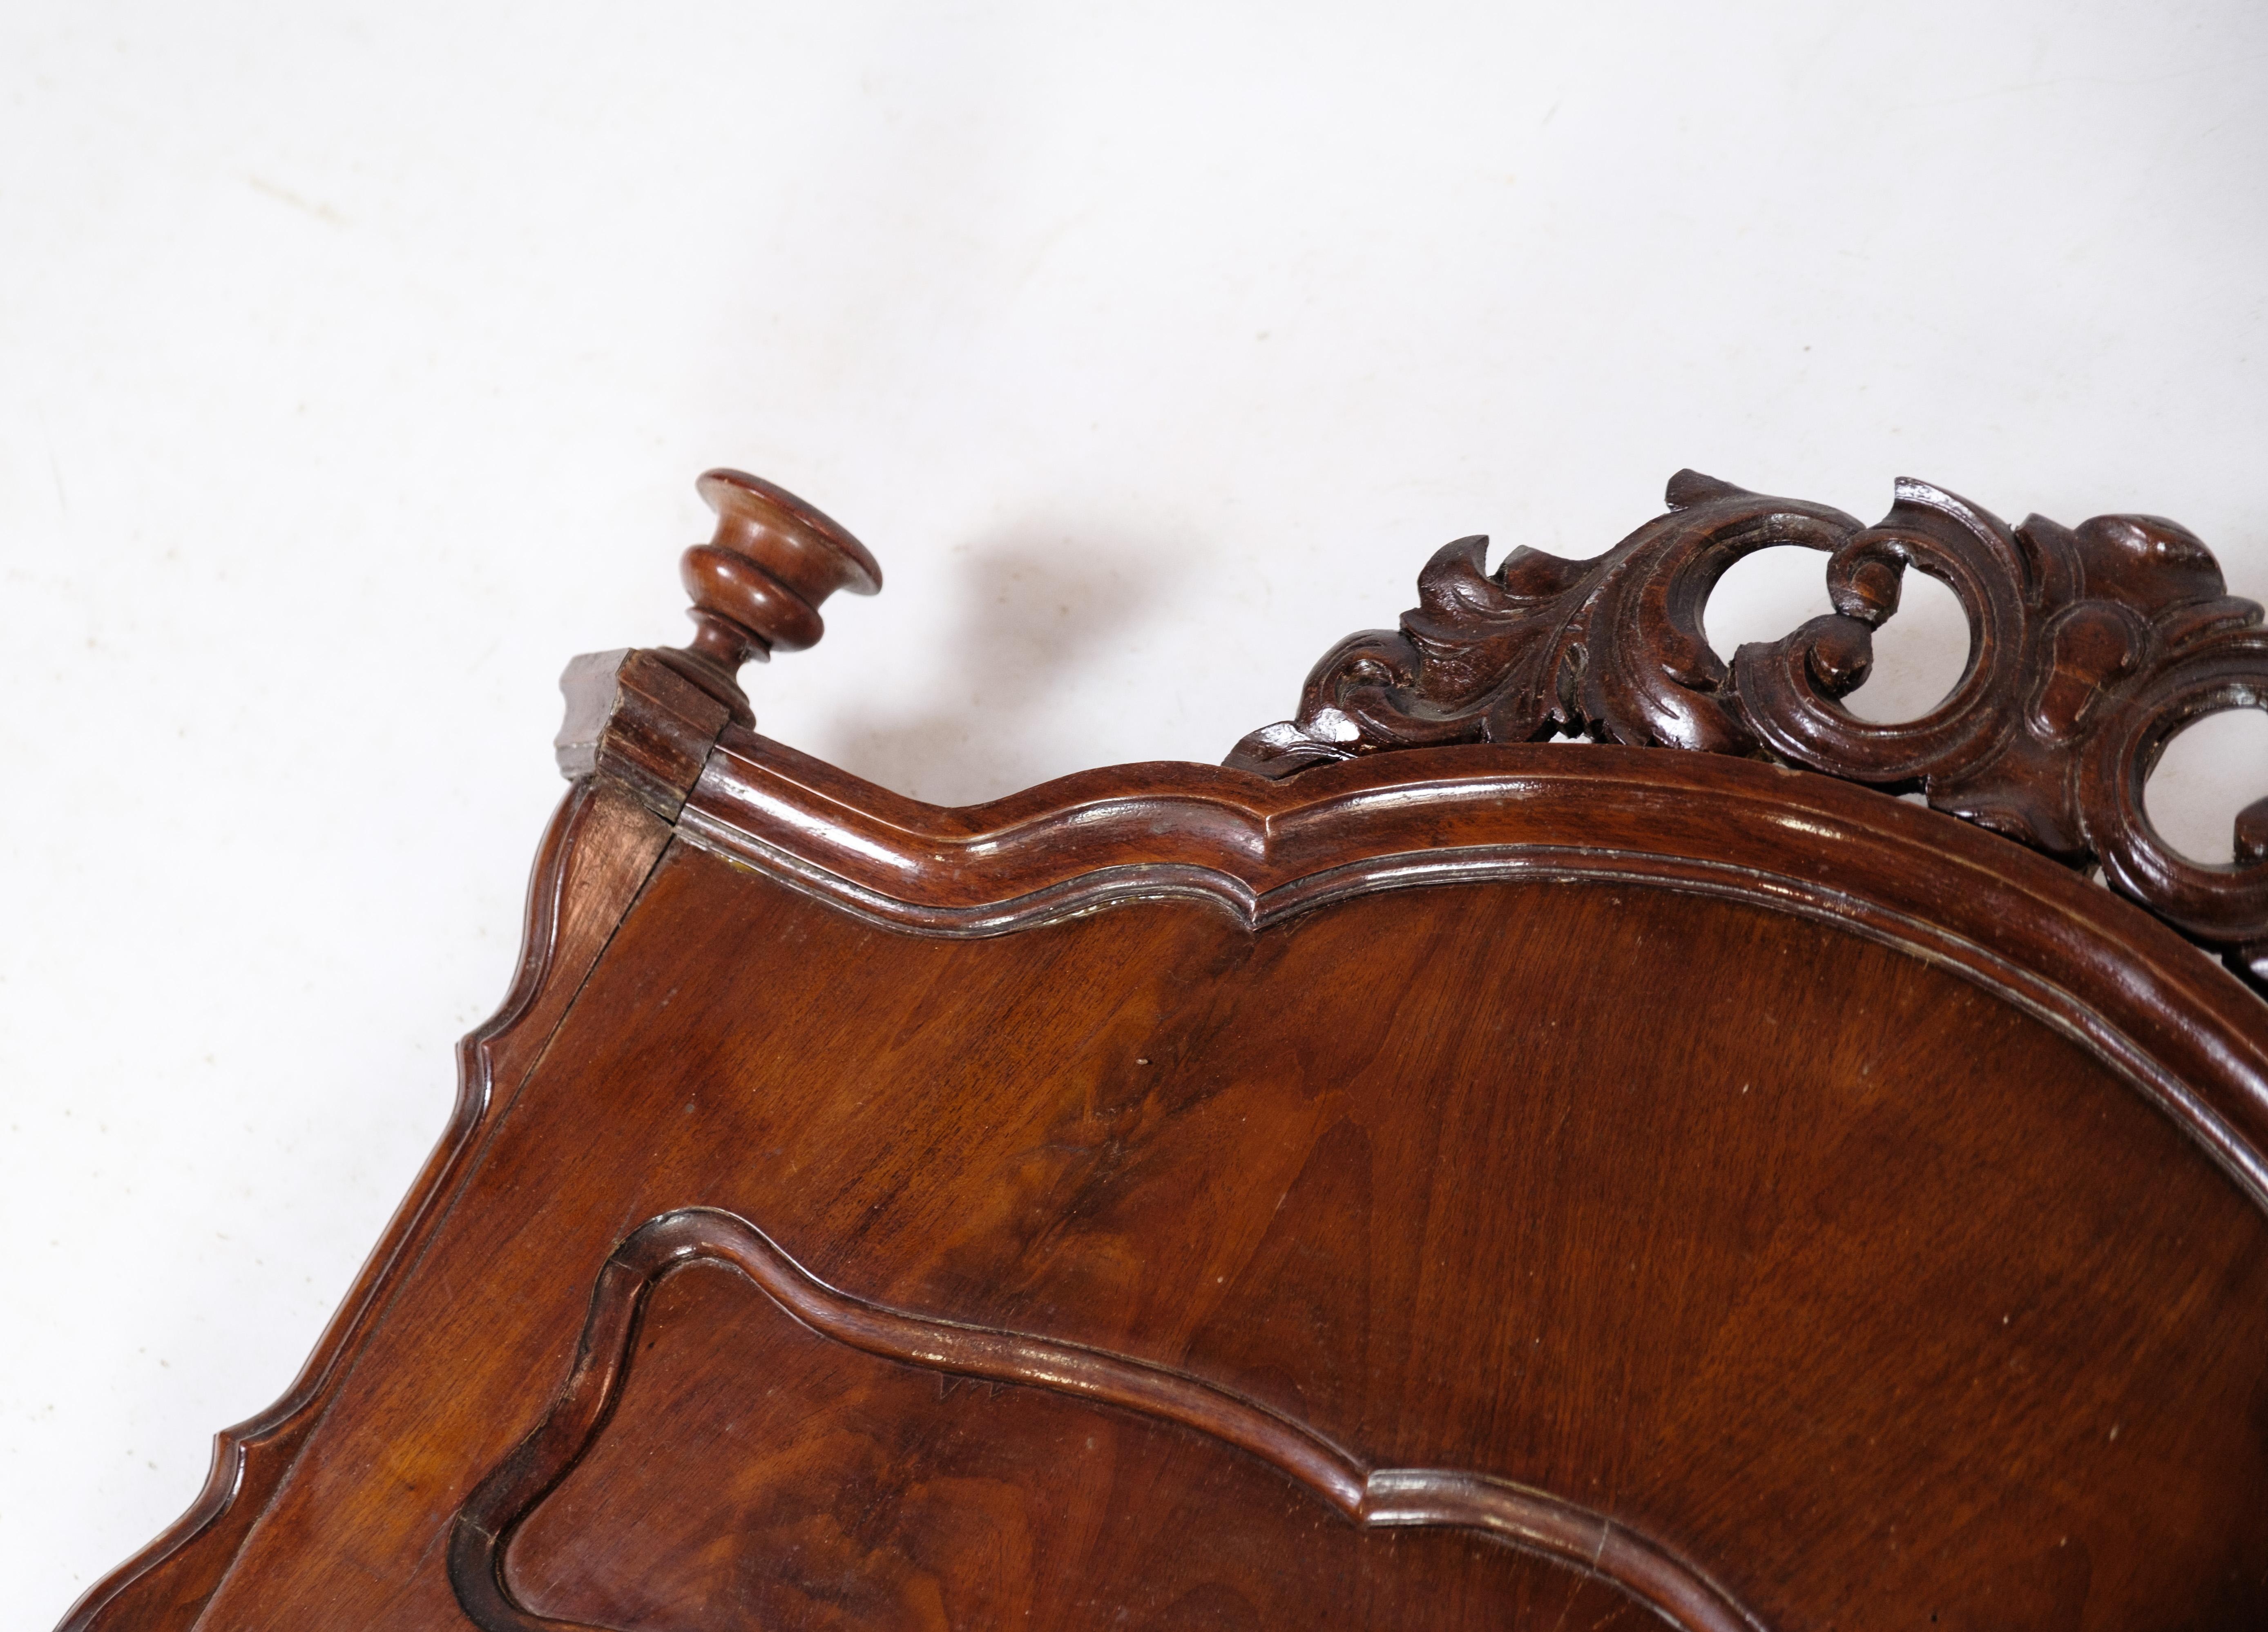 Mirror of hand-polished mahogany, with carvings, made in Denmark from around the 1880s
Dimensions in cm: H:130 W:63.